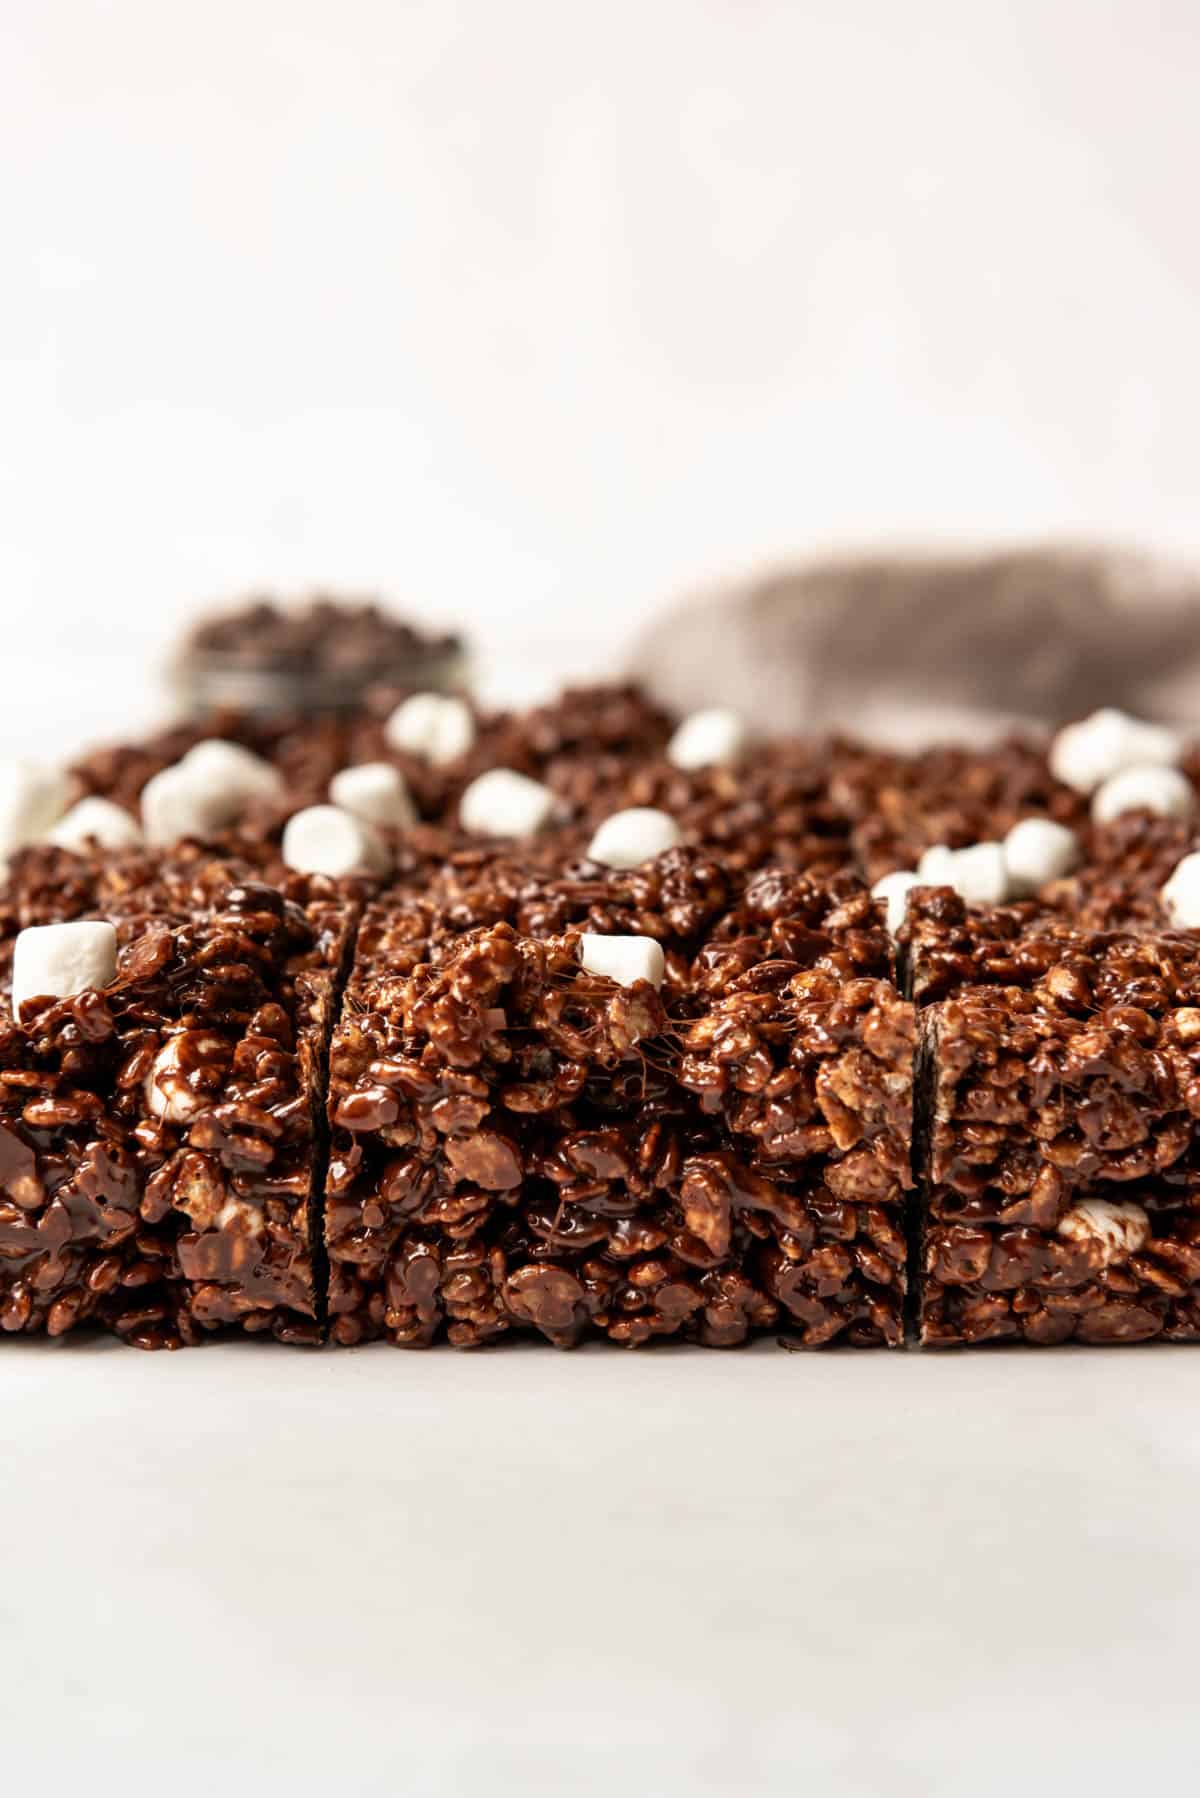 Gooey chocolate rice krispy treats on a white surface with marshmallows on top.